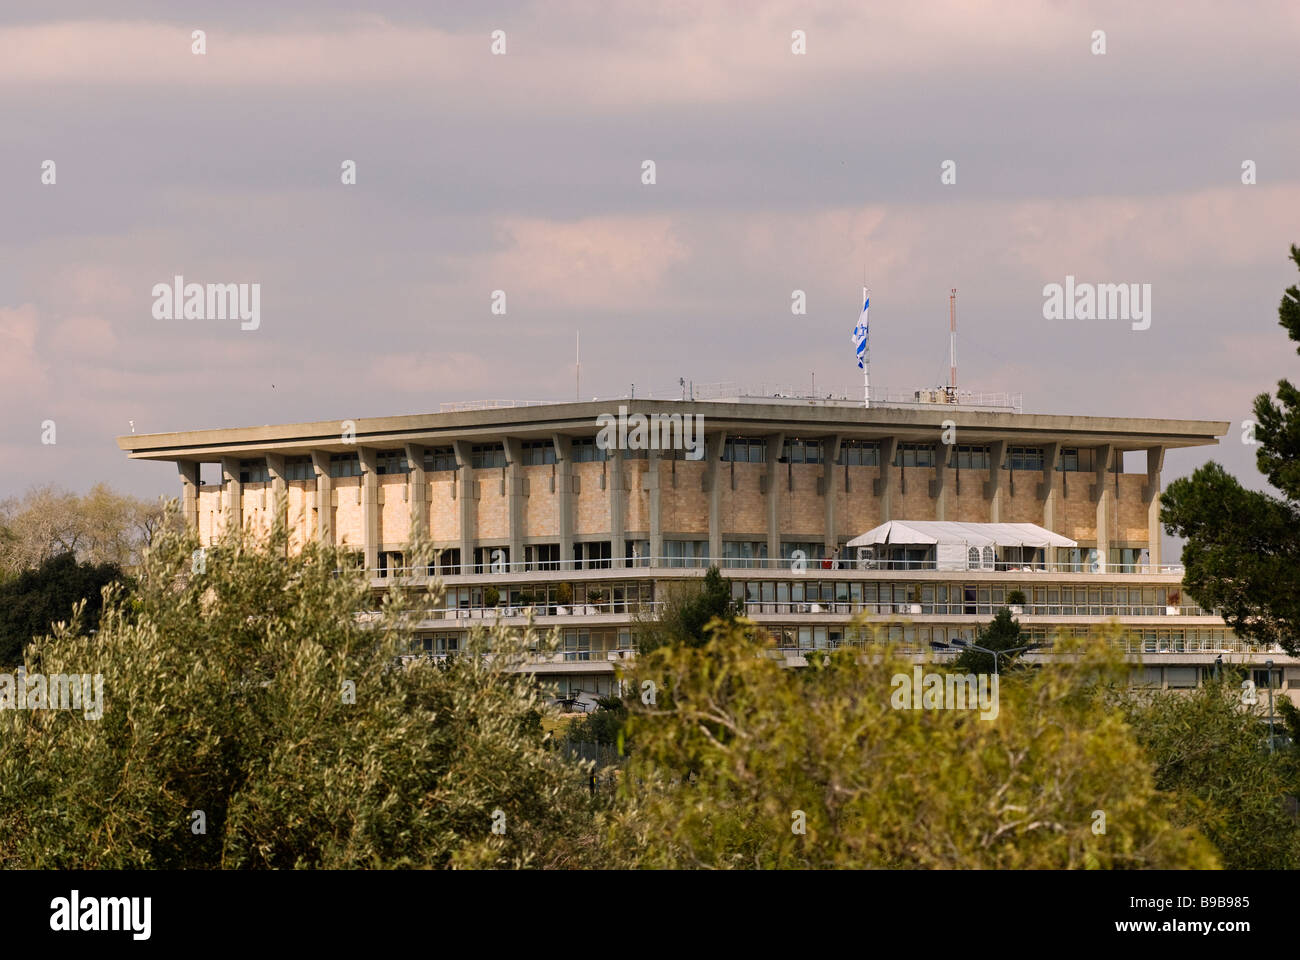 View of the Knesset the unicameral national legislature of Israel, located in Kiryat HaLeom also known as Kiryat HaUma which was traditionally conside Stock Photo